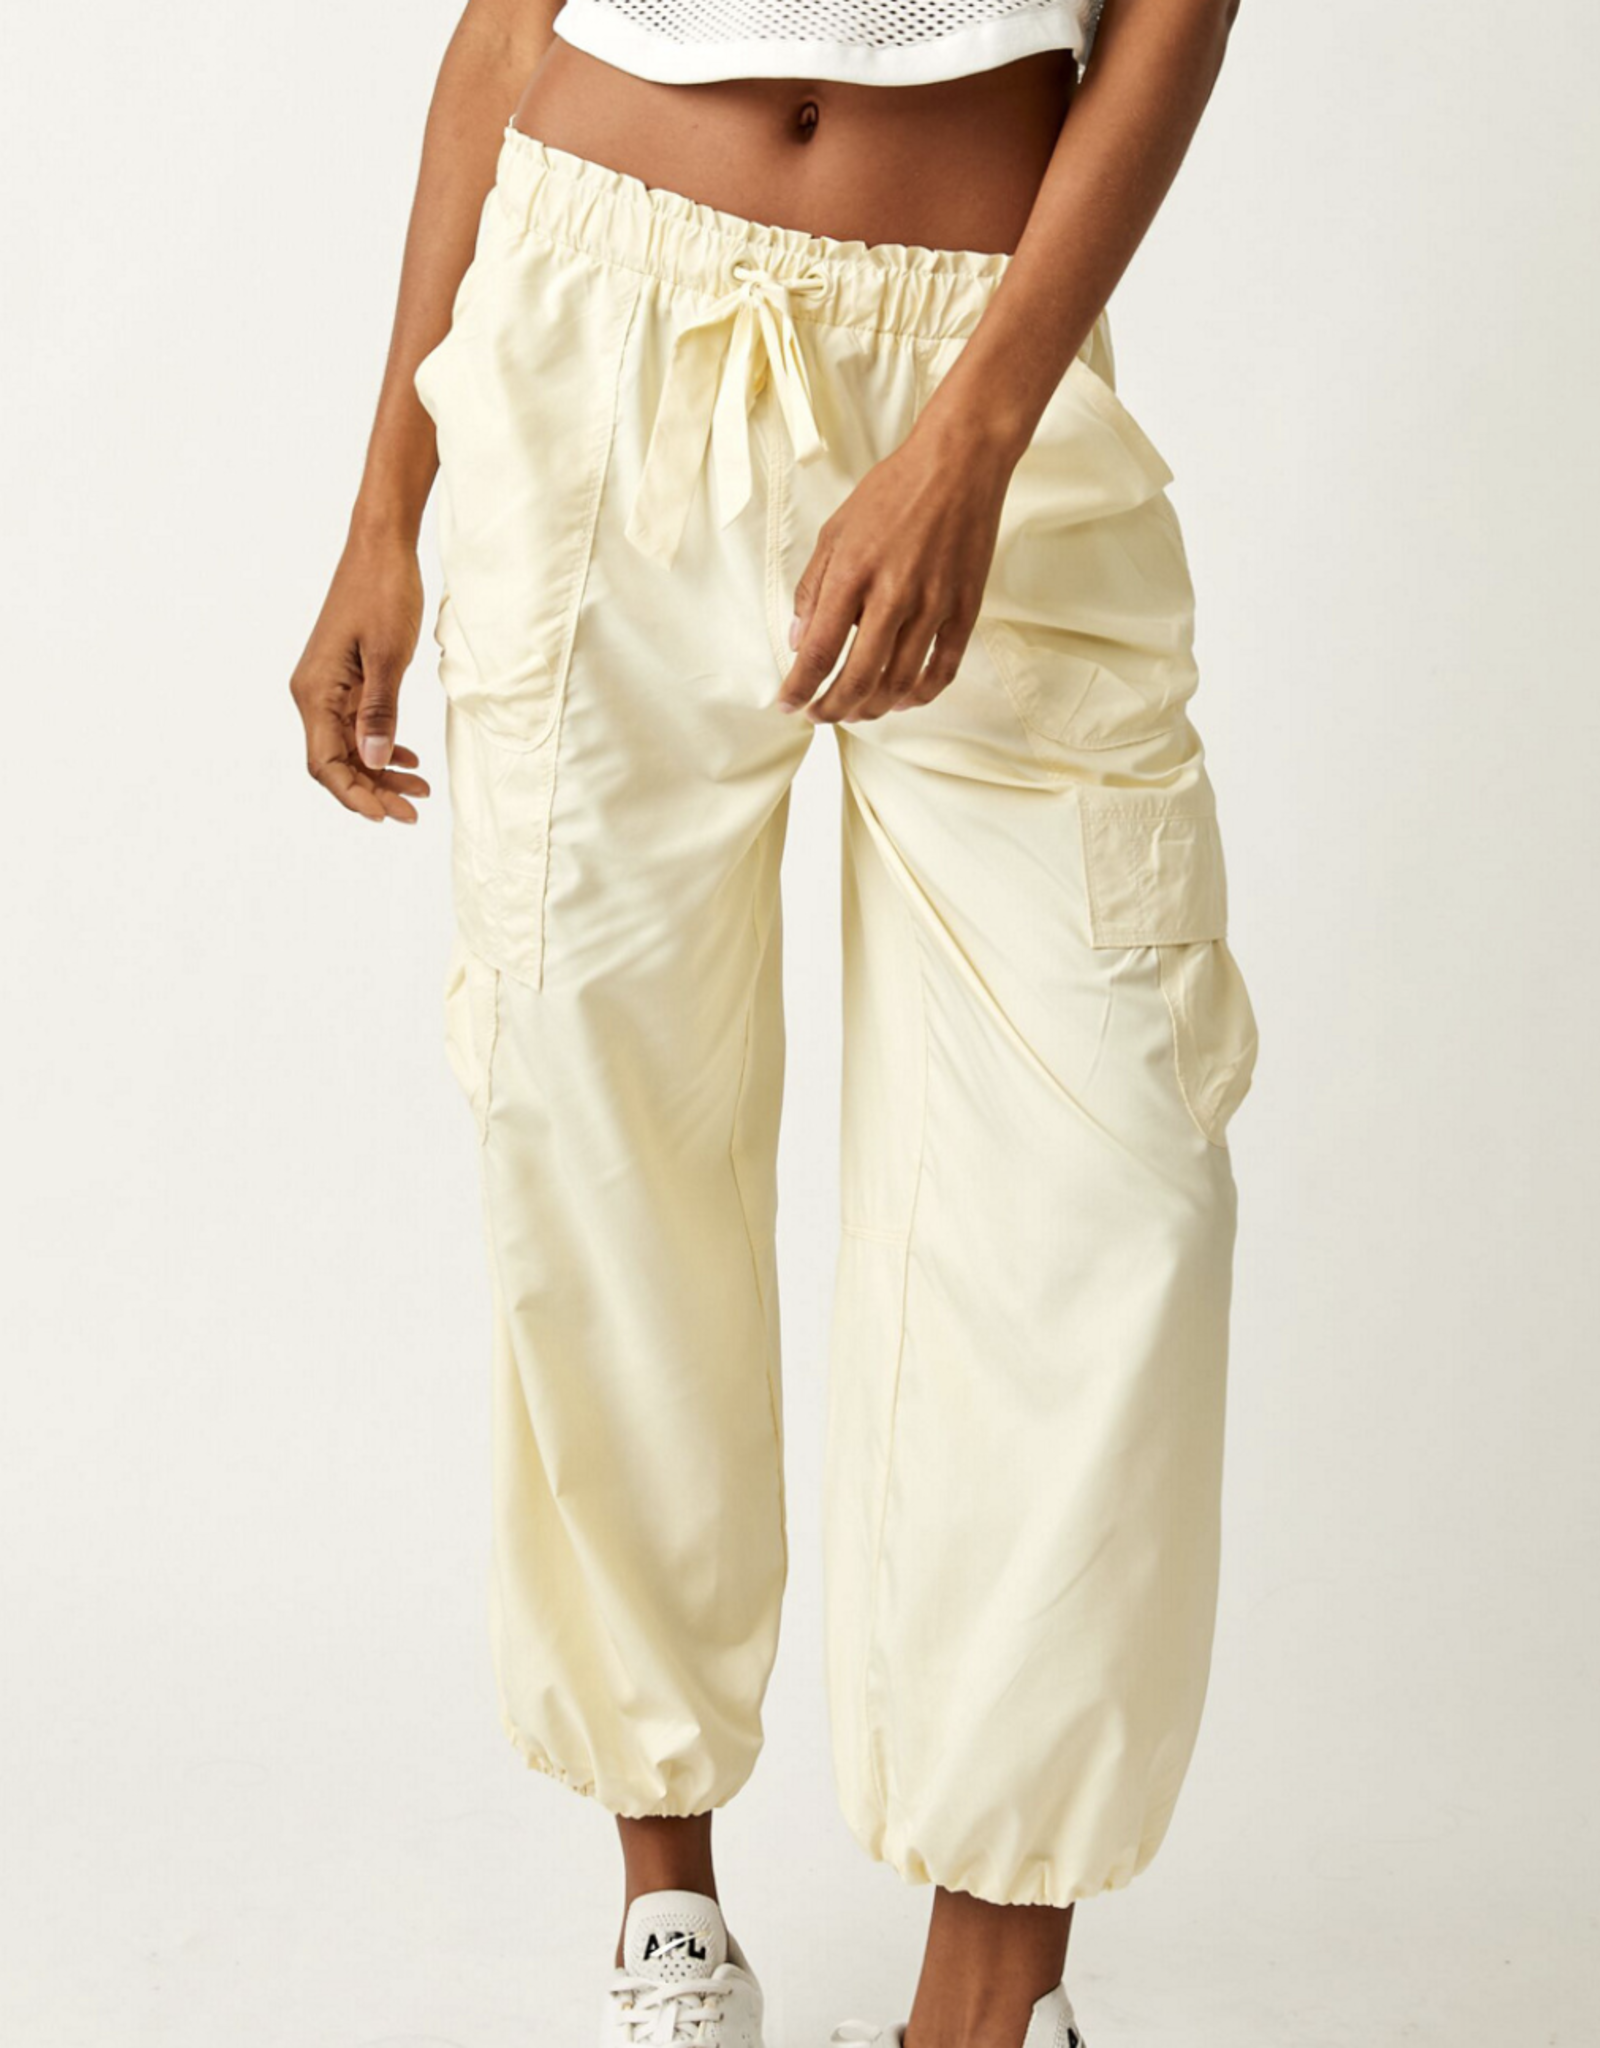 Free People Down to Earth Pant